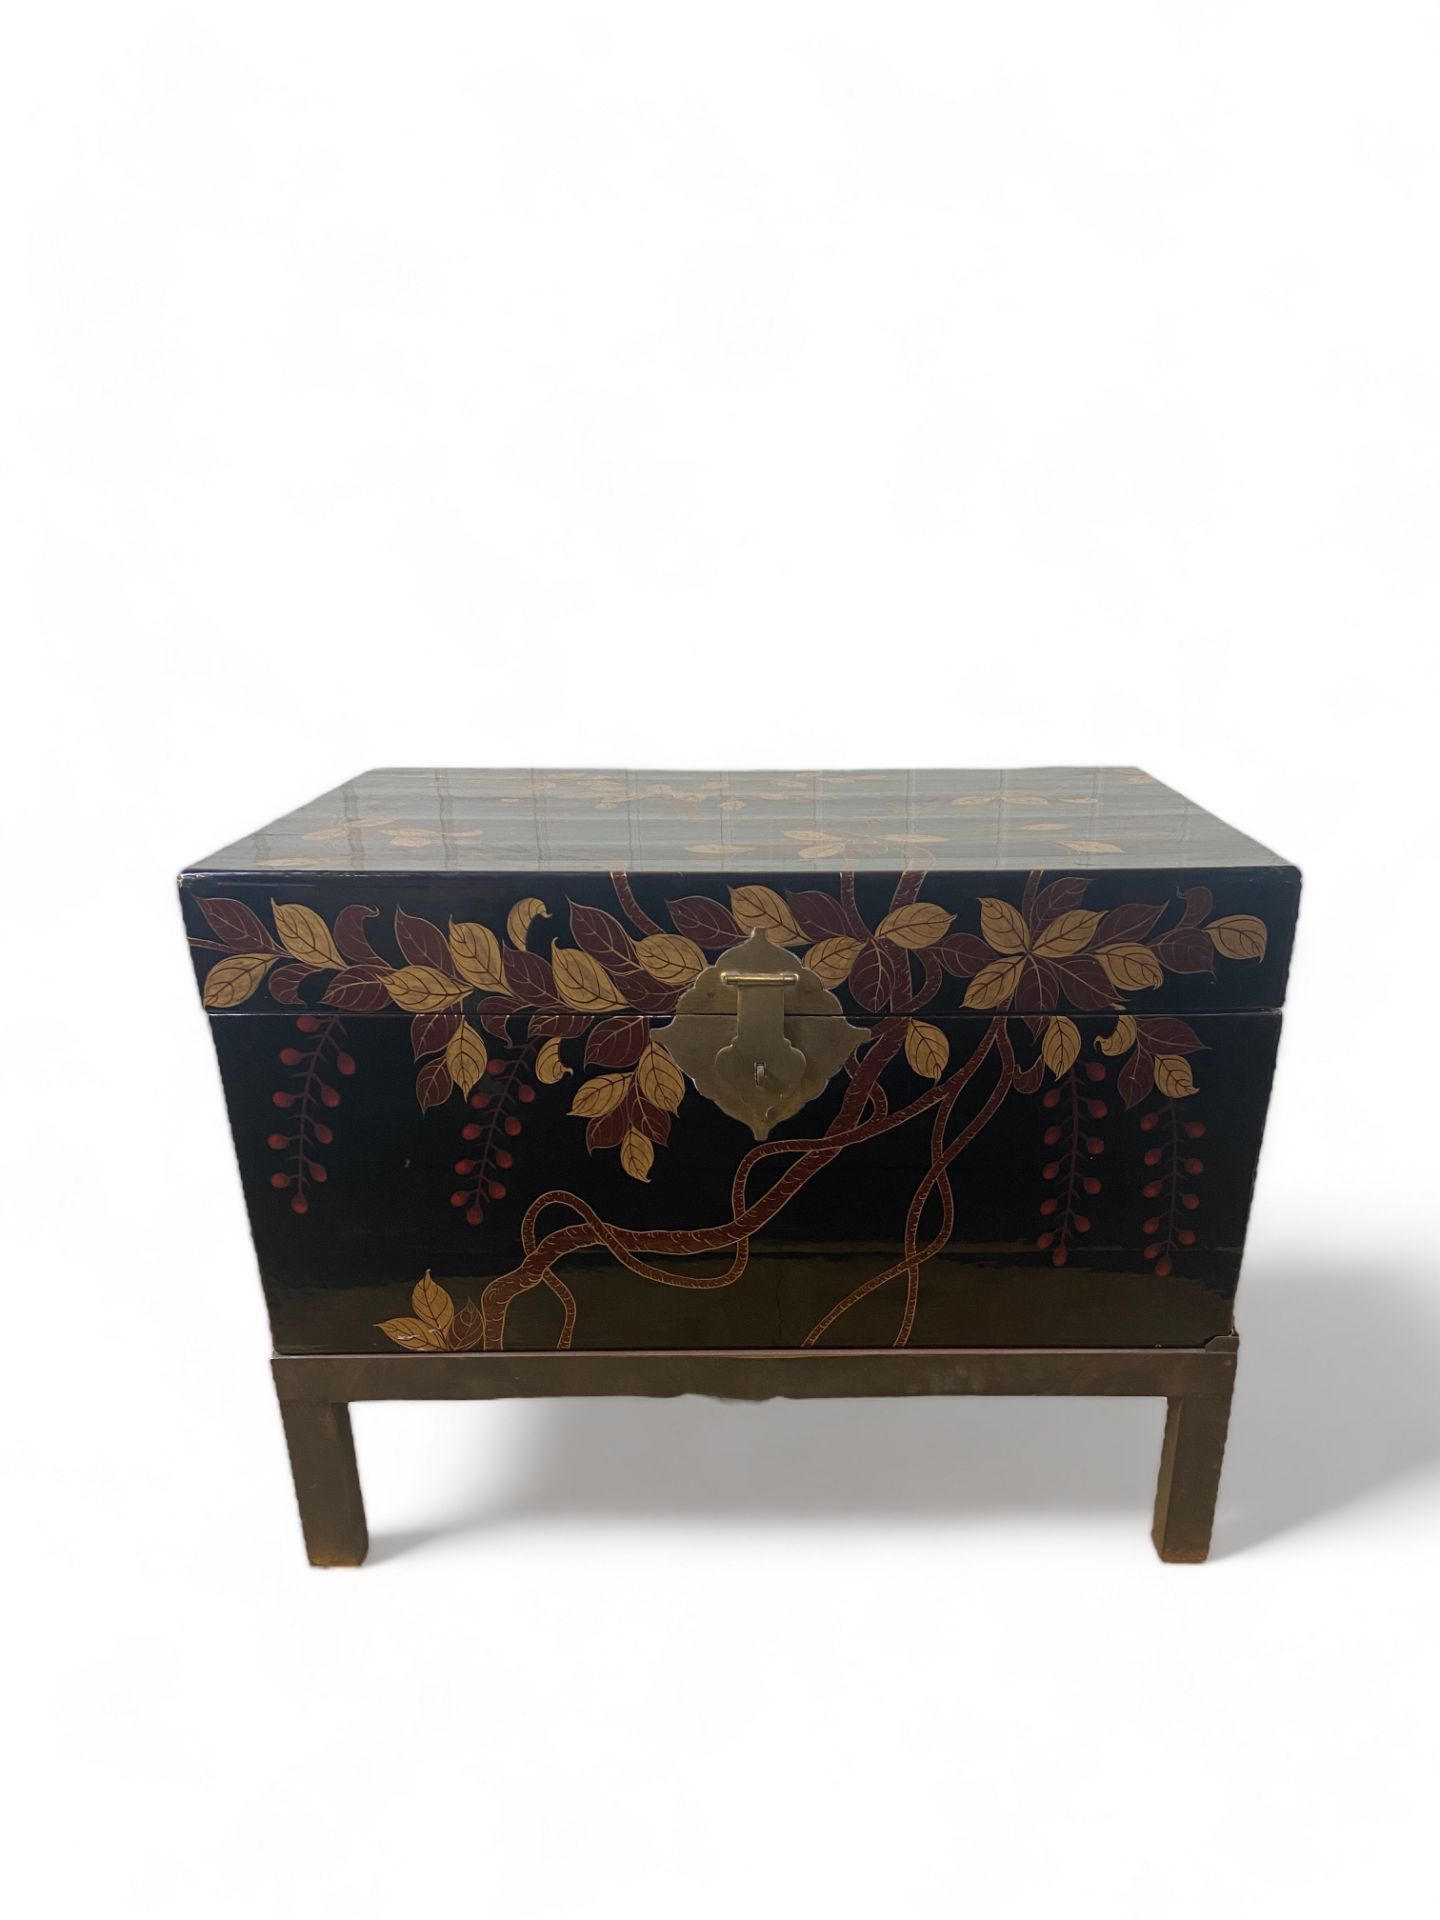 A 20th century Chinese black and gilt lacquer box on a metal stand